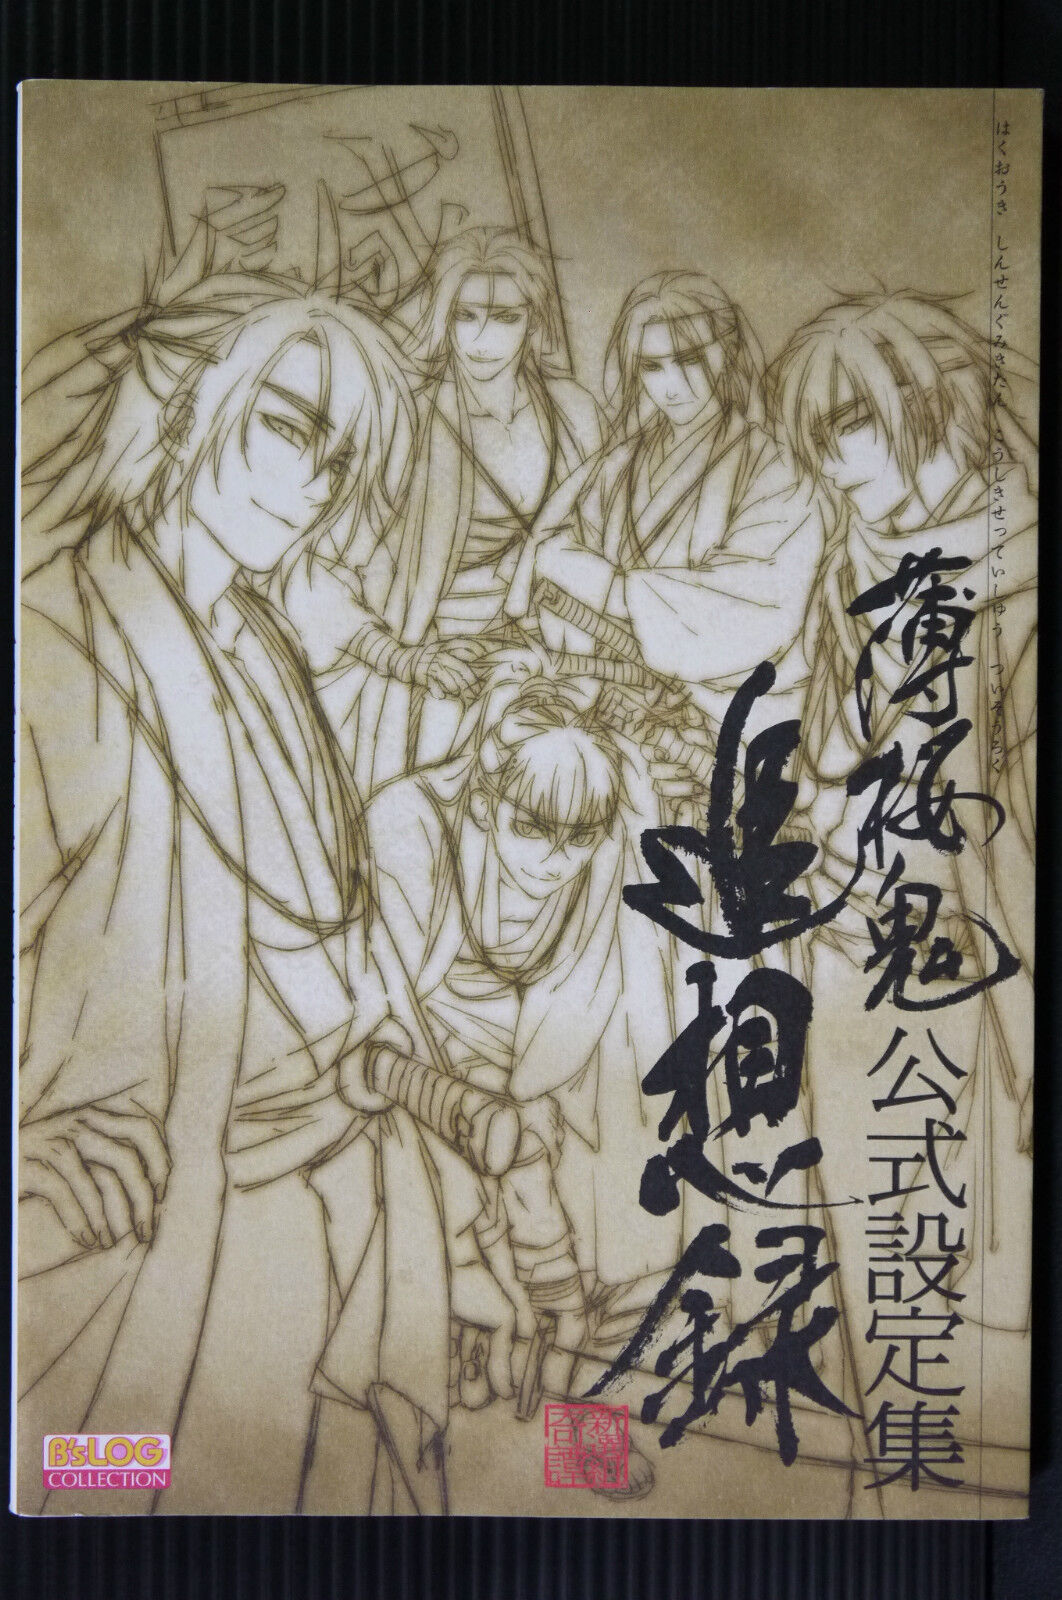 JAPAN Hakuouki Official Material Collection Tsuisouroku (Official Art Guide Book